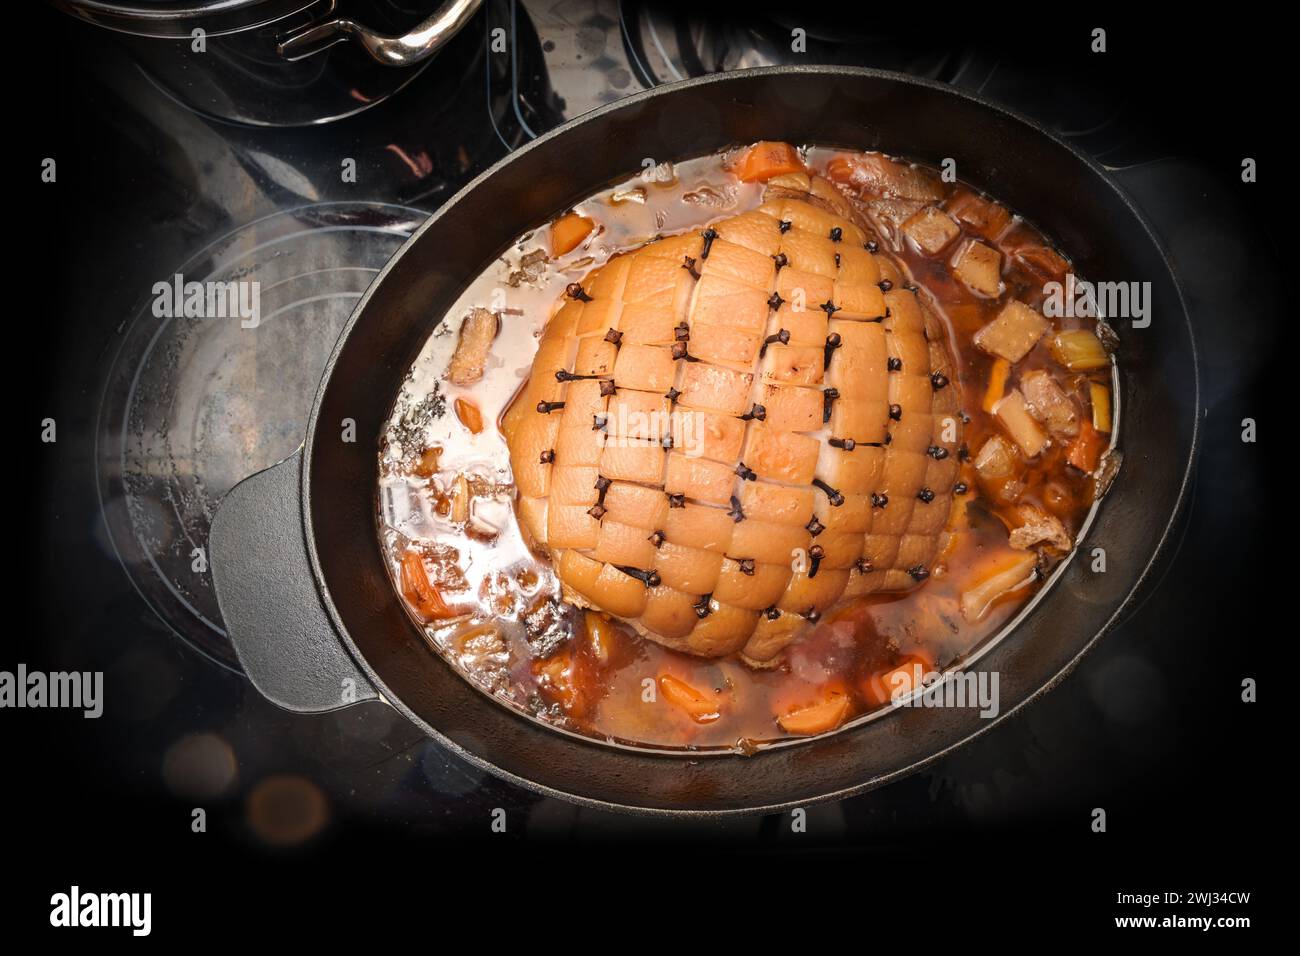 Roast pork with rind in diamond shapes and larded with cloves in a casserole with vegetables and broth on a black stove top, coo Stock Photo